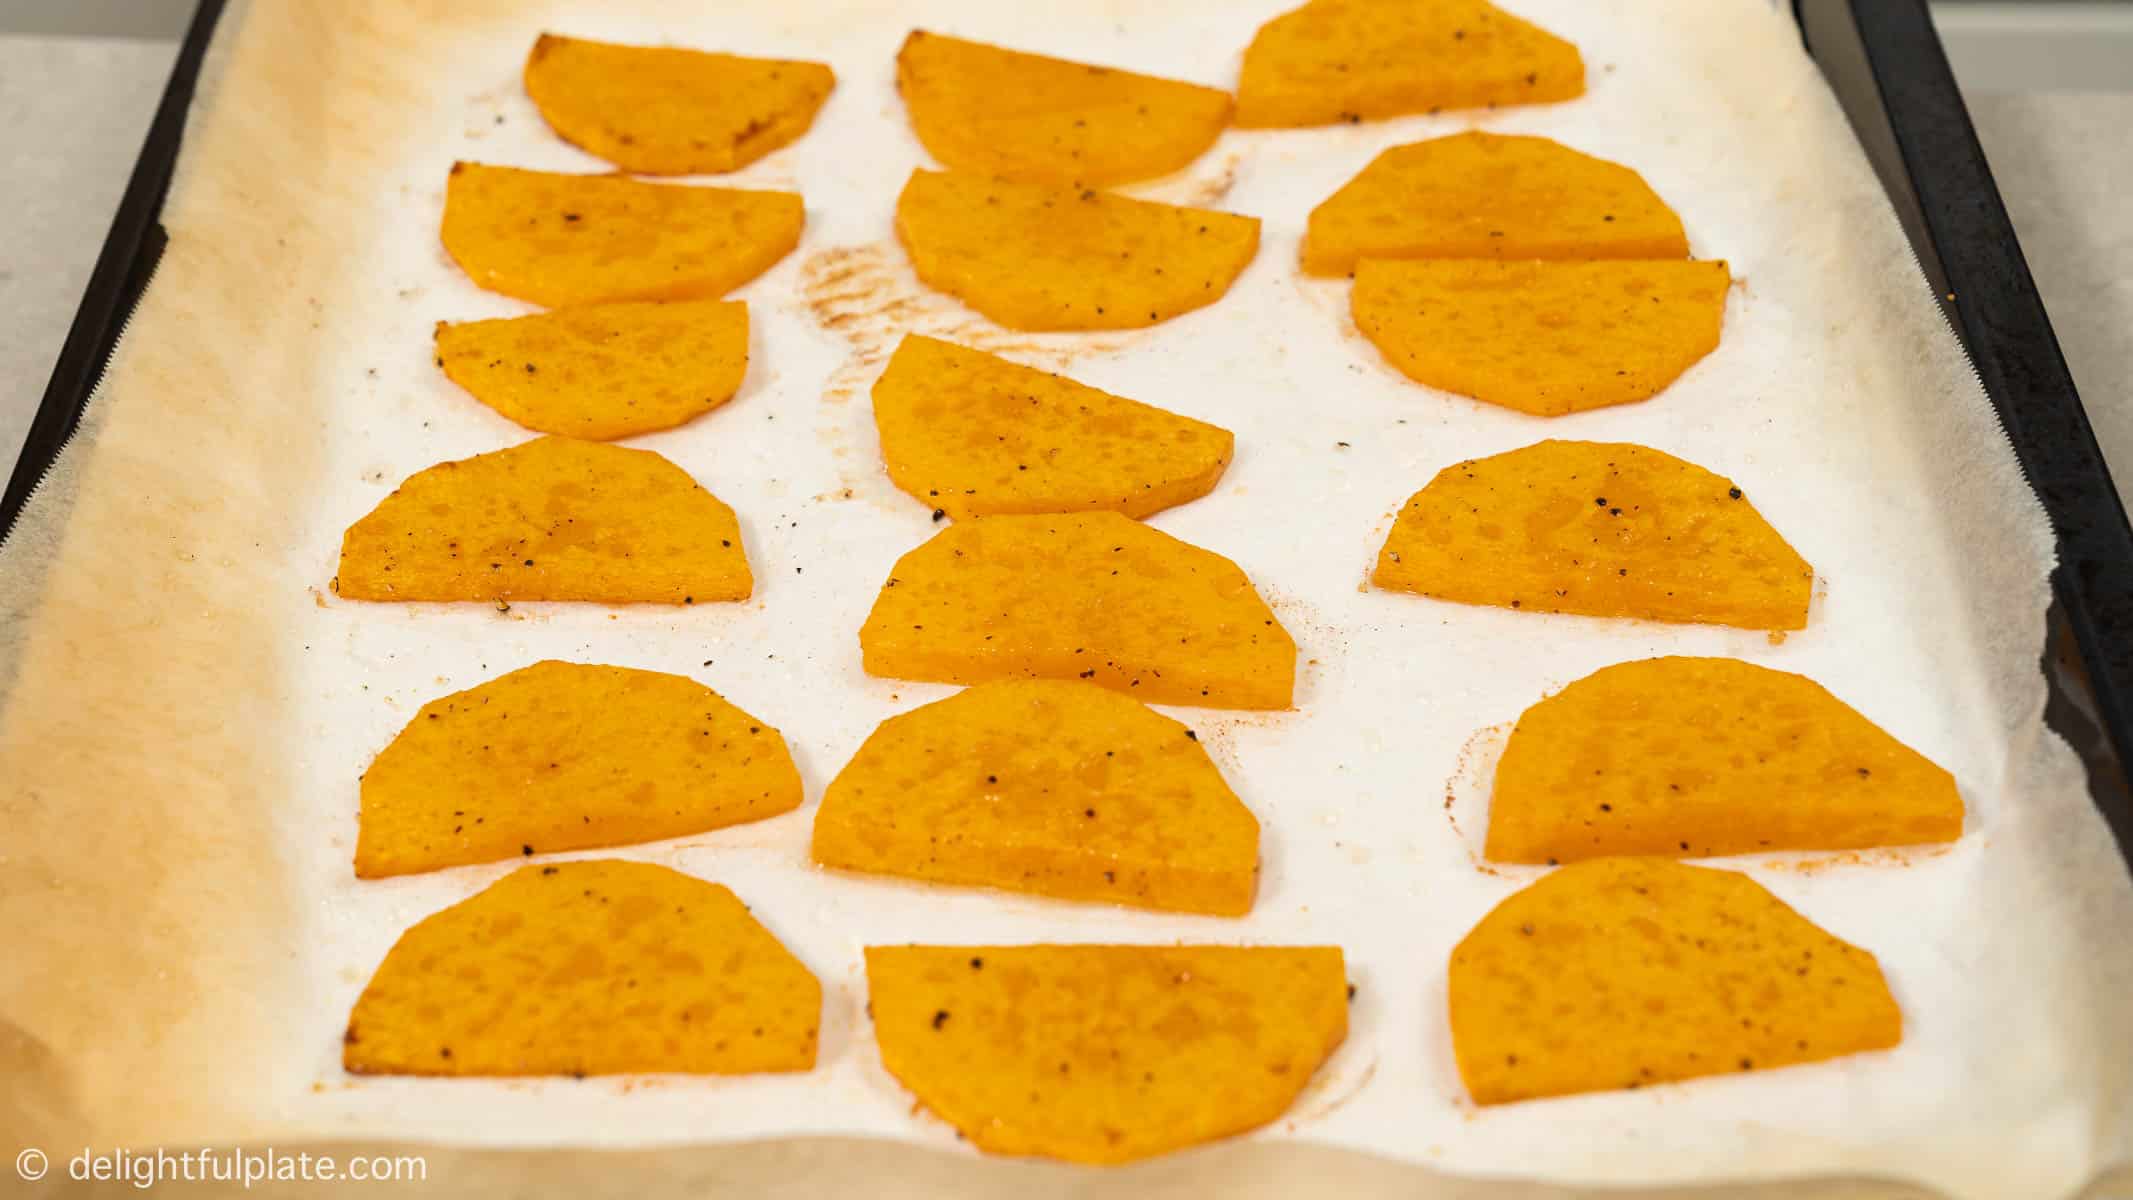 roasted butternut squash slices on a baking sheet